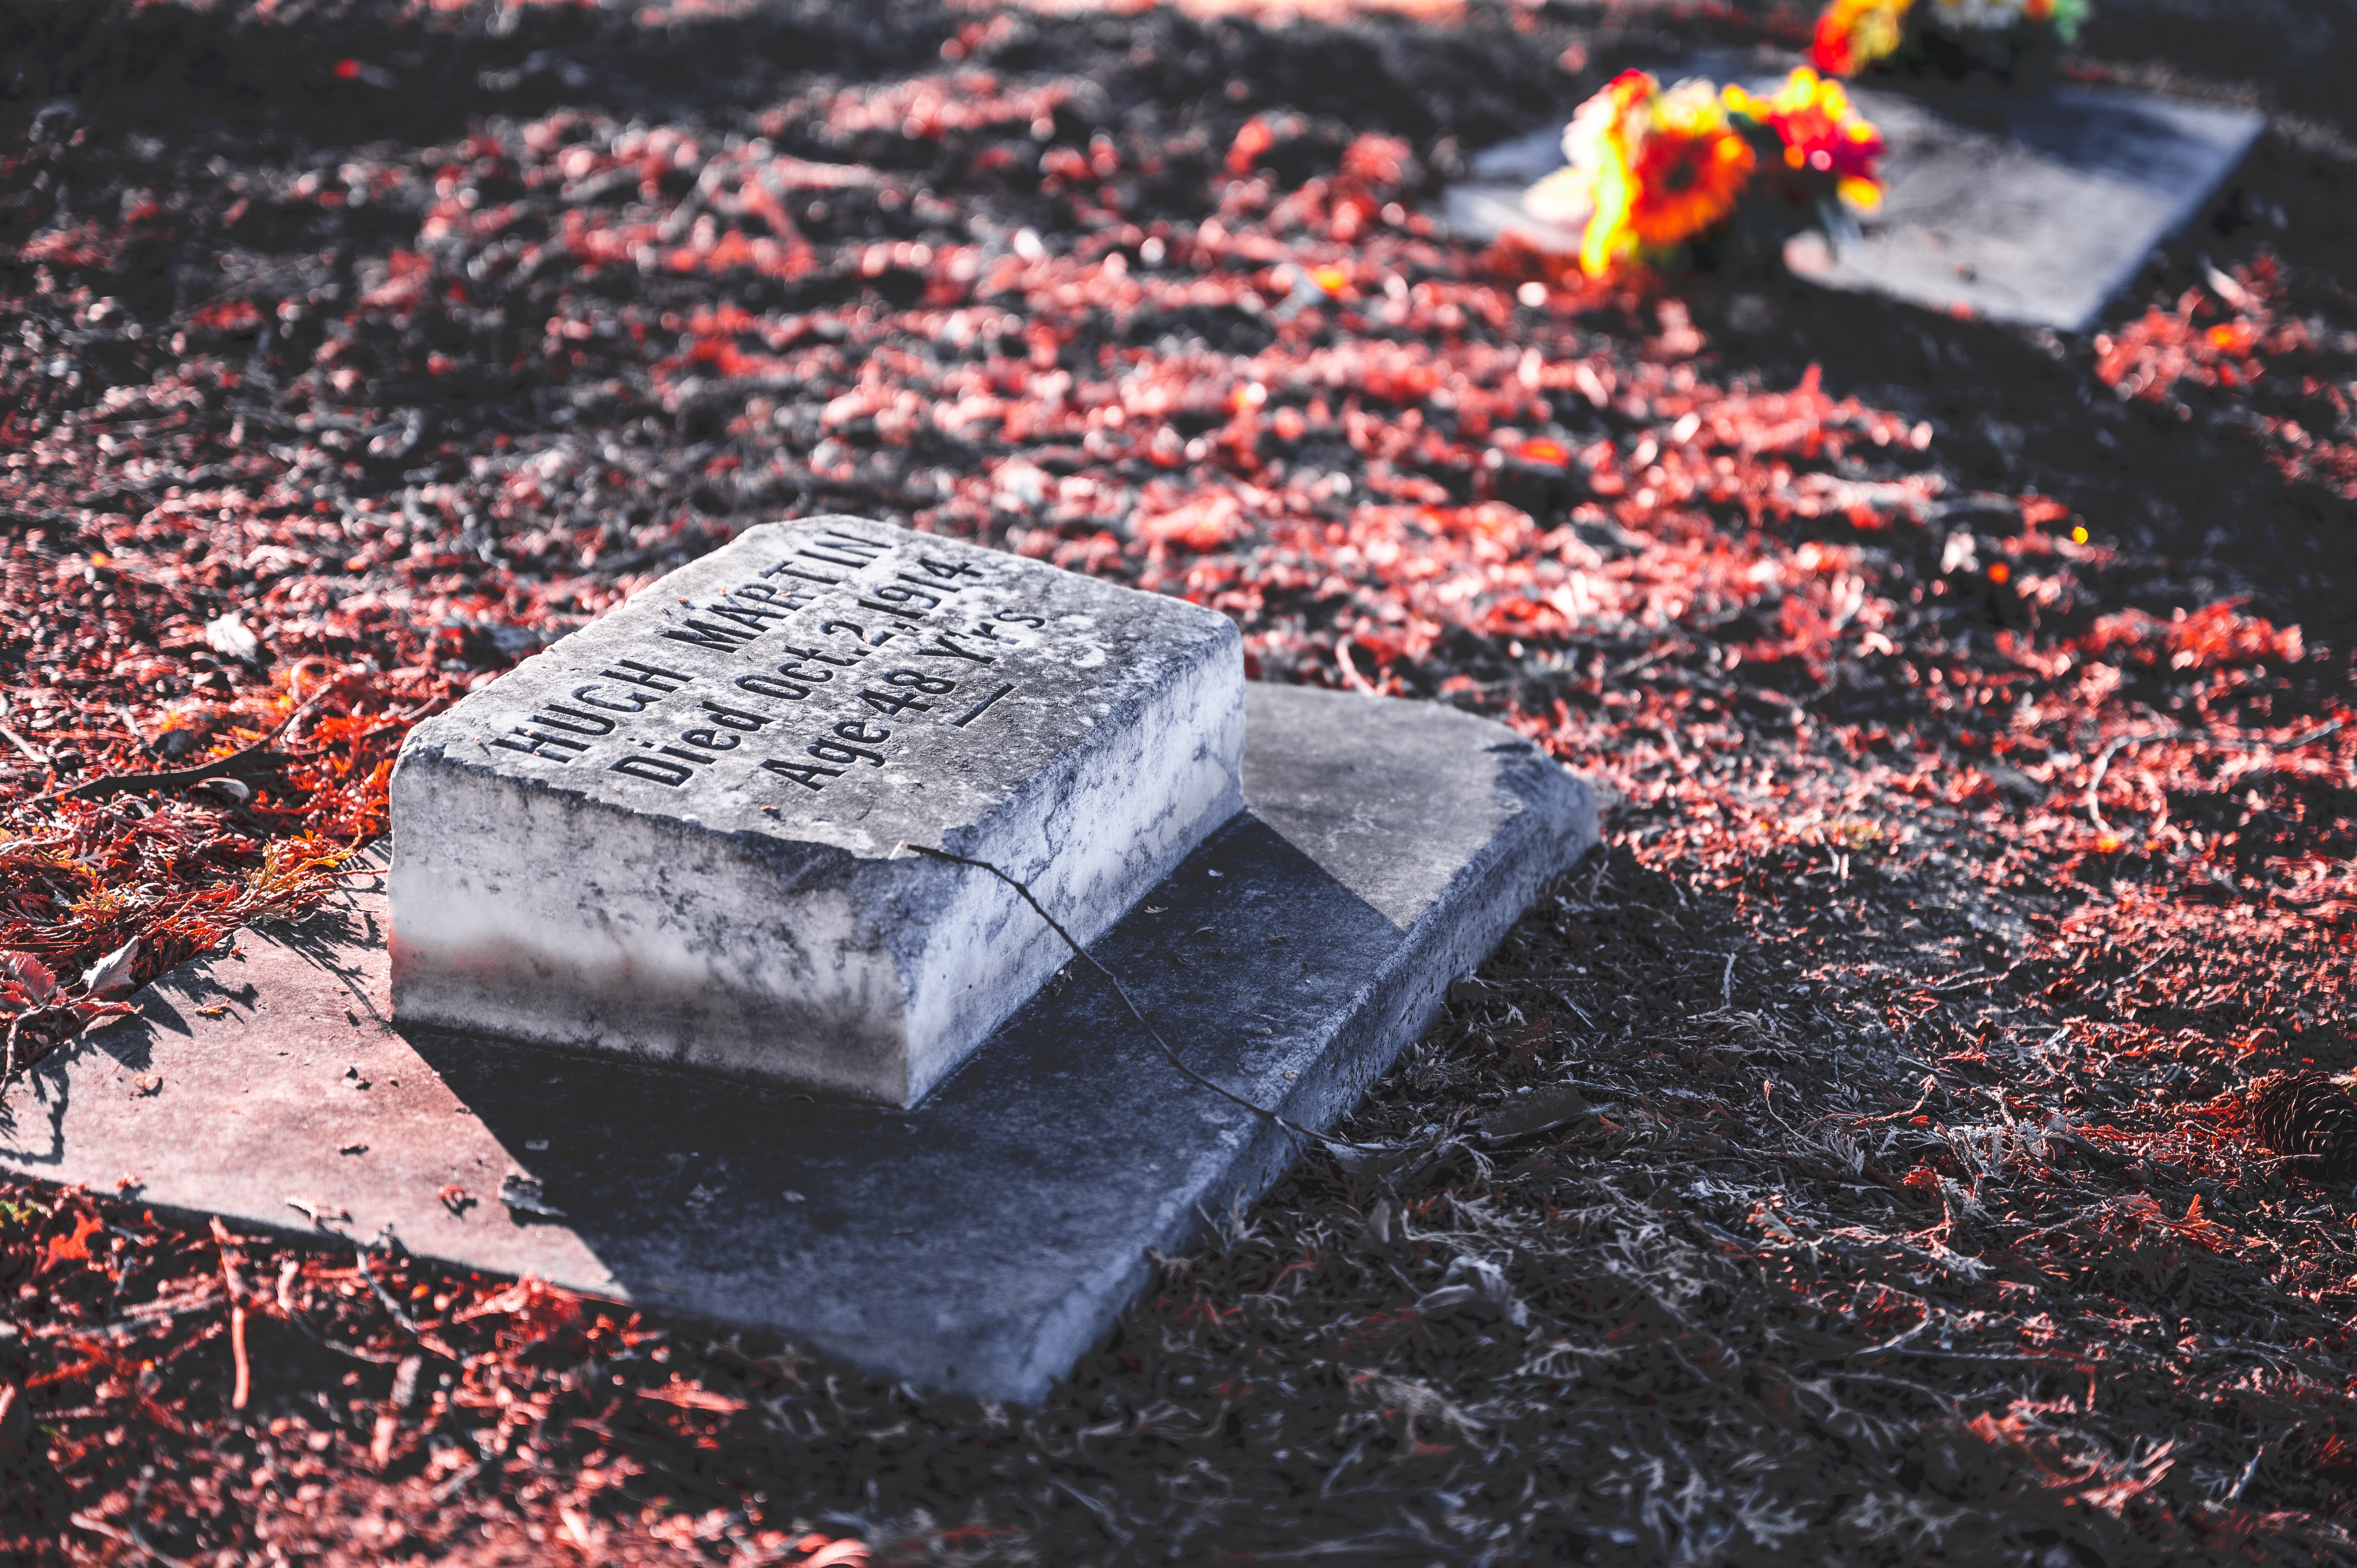 The dates on the headstones might help in finding the roots of the deceased, claim professionals | Photo: Pexels